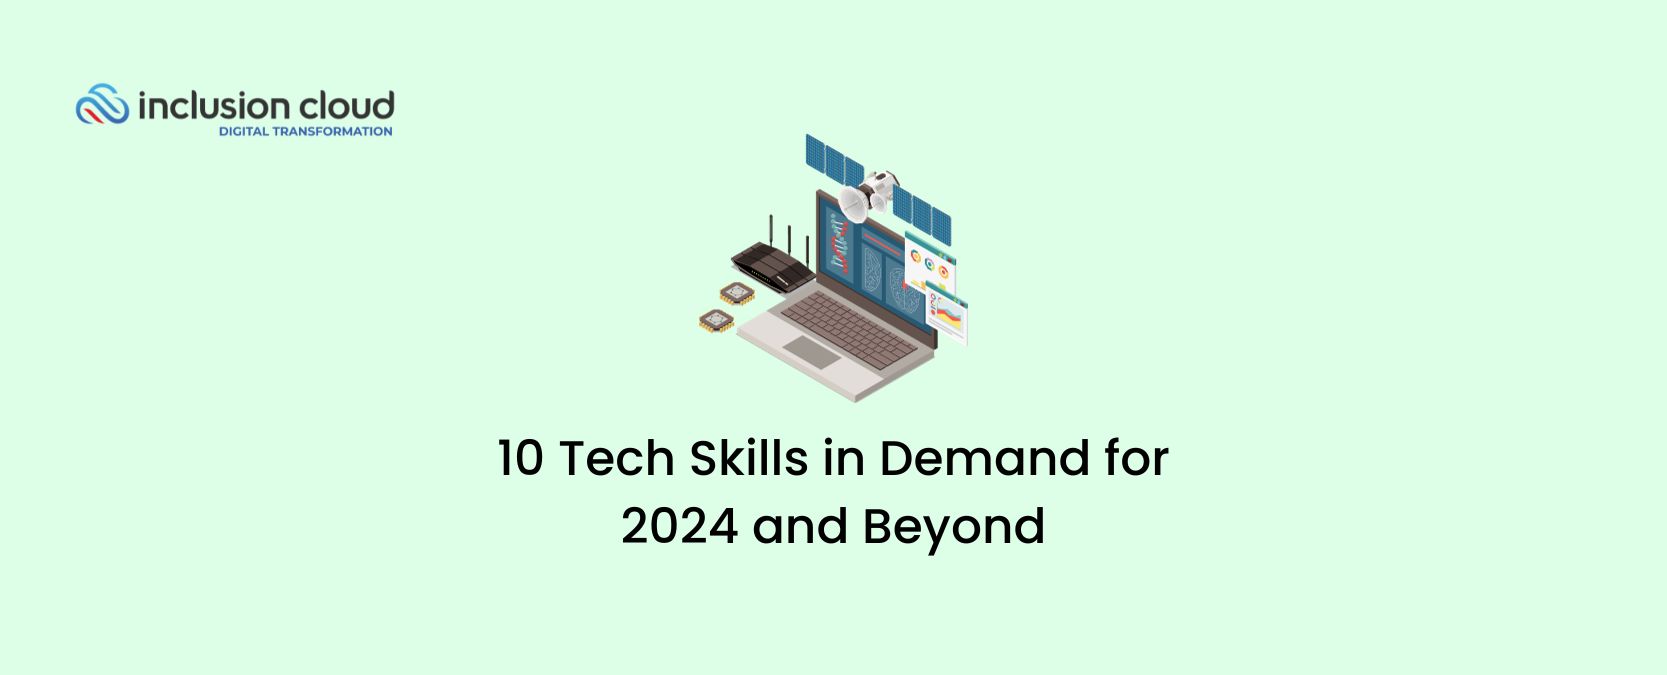 10 Tech Skills in Demand for 2024 and Beyond